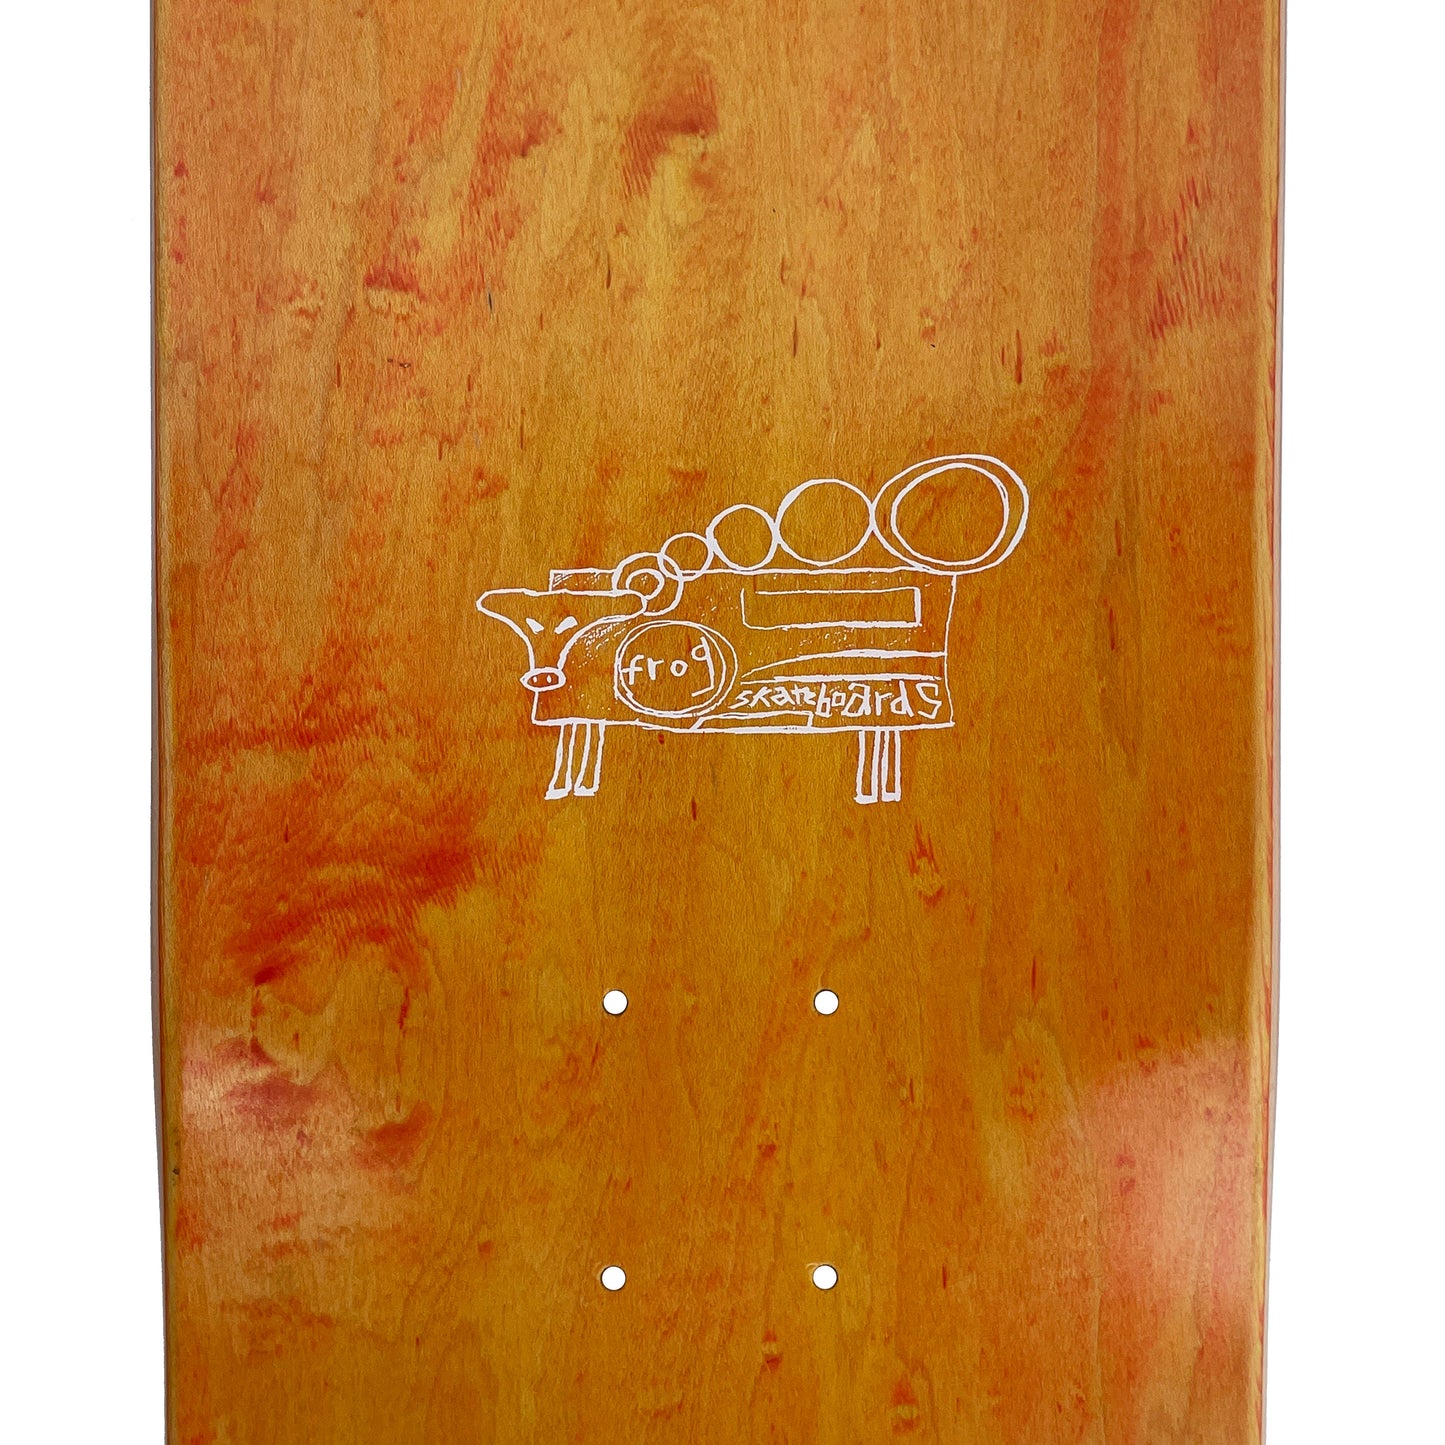 Frog Painted Cow Dustin Henry Skateboard Deck 8.25